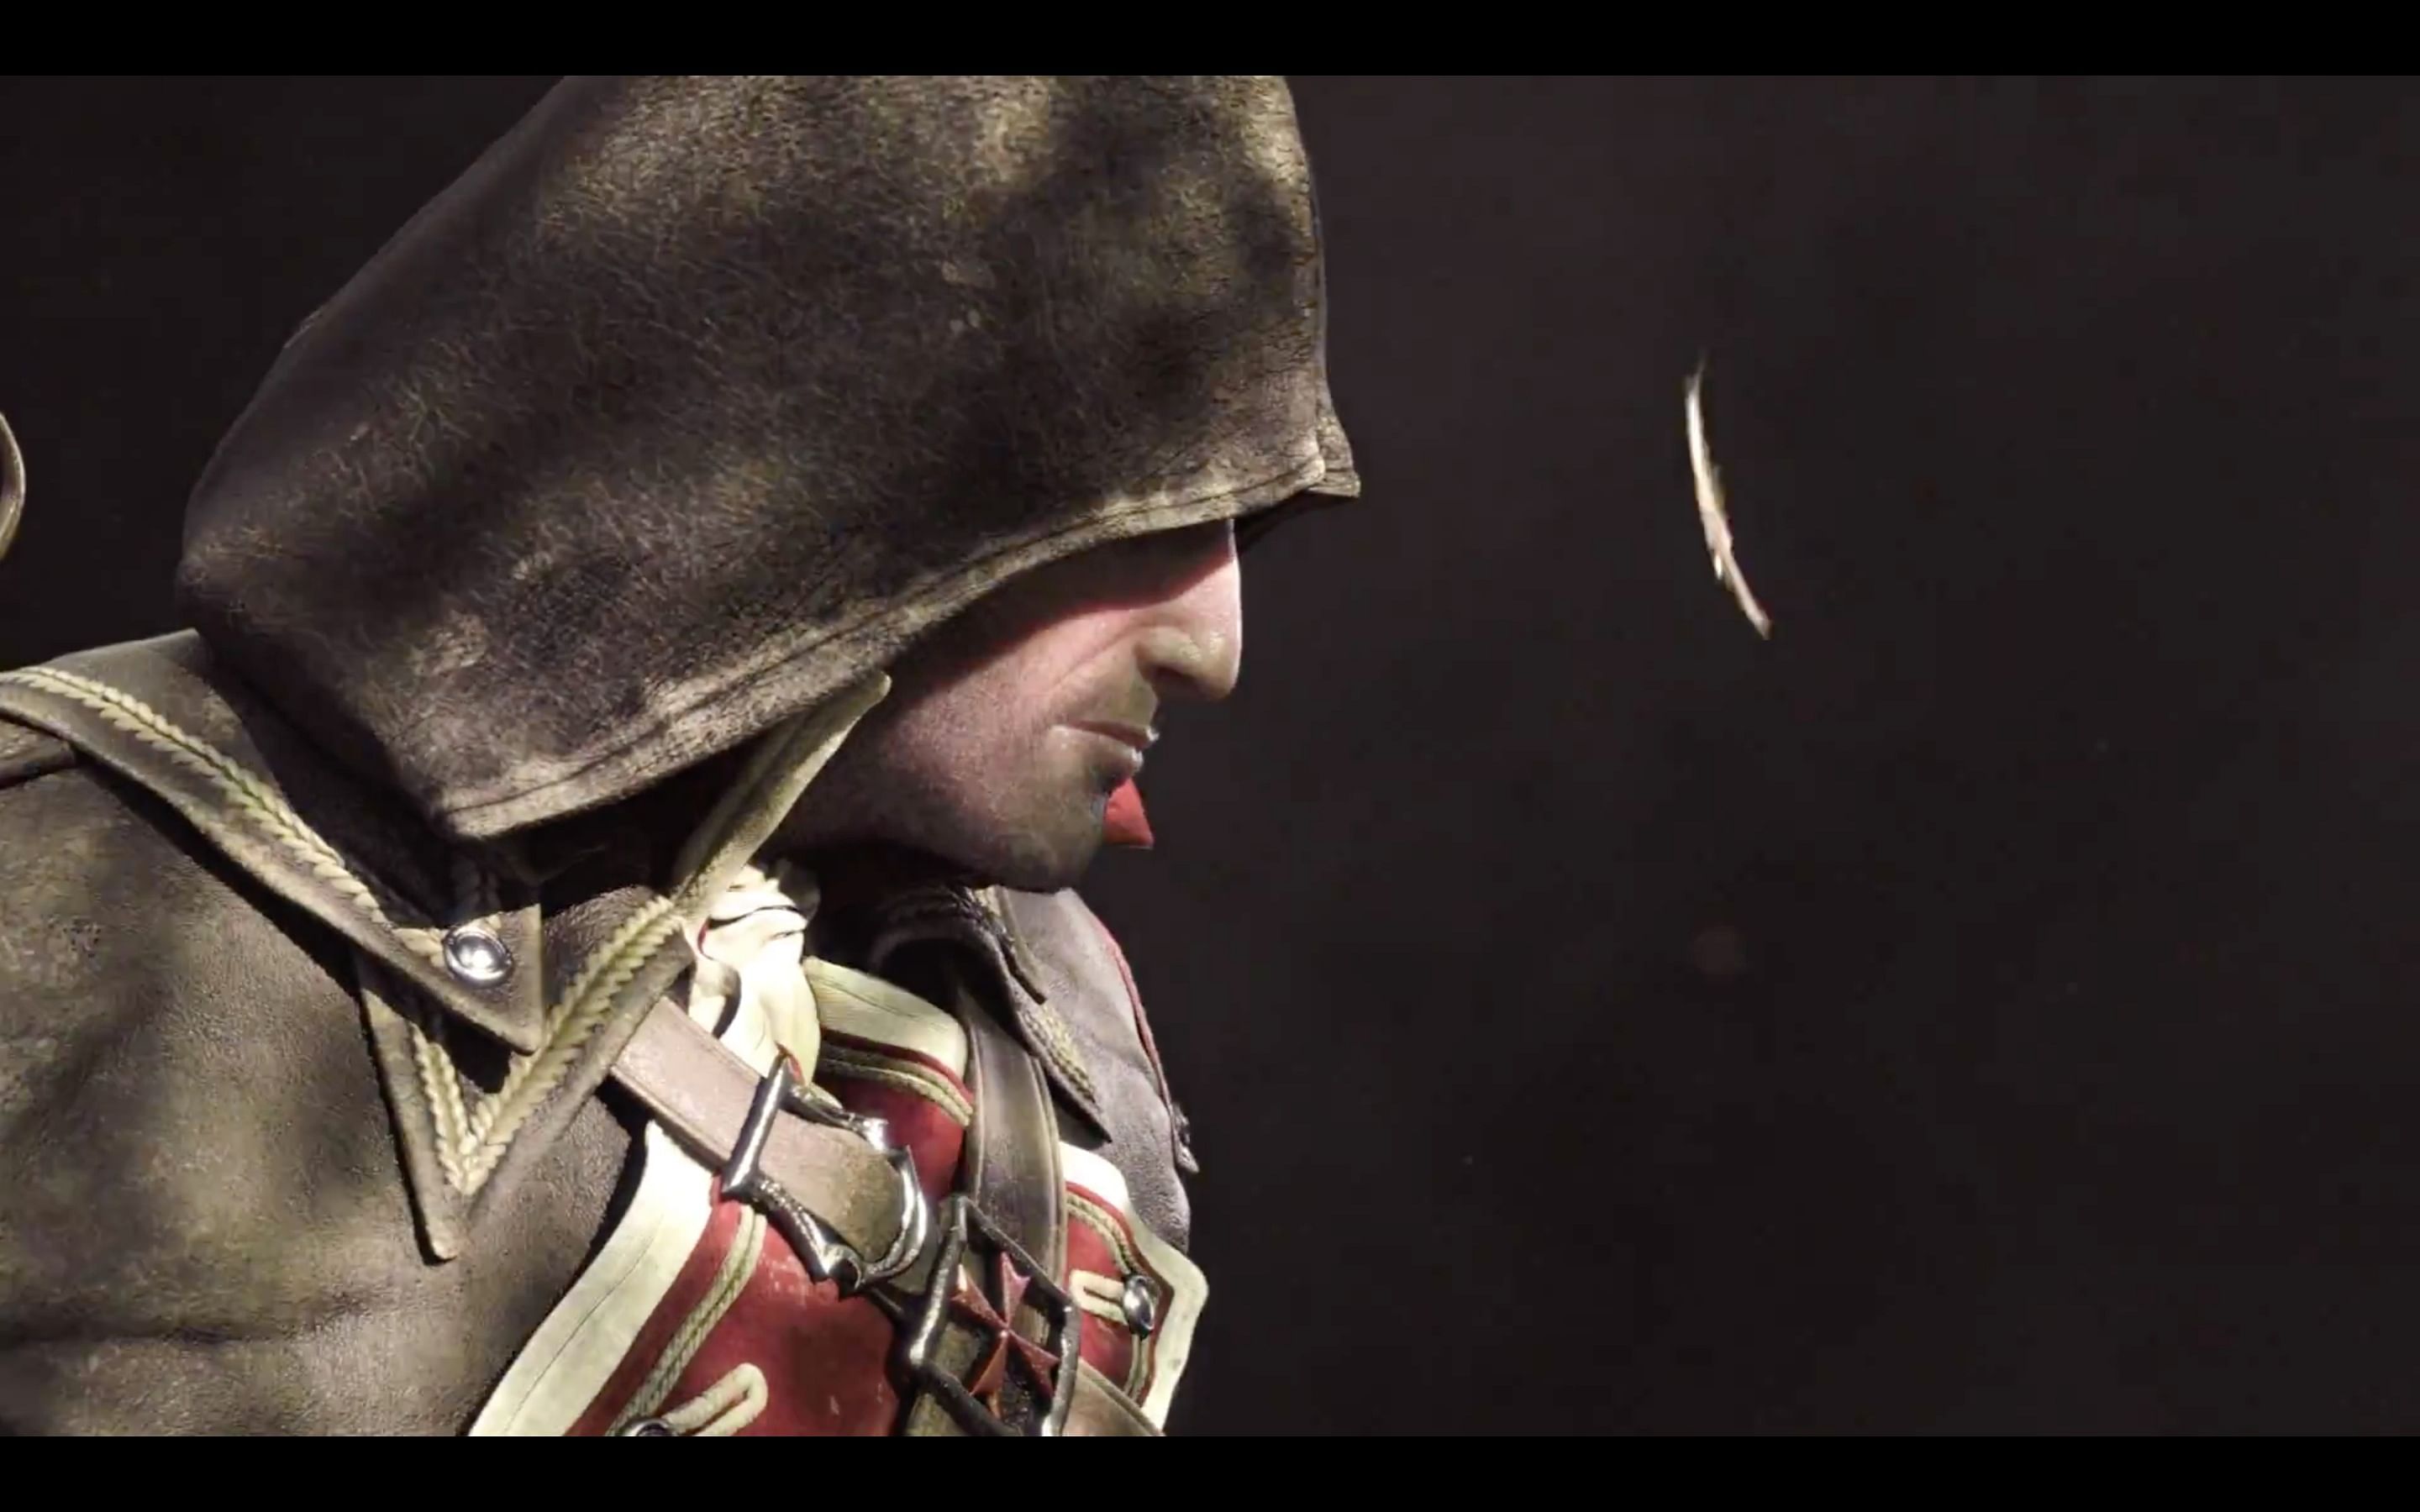 Assassin's Creed Rogue: Launch Trailer